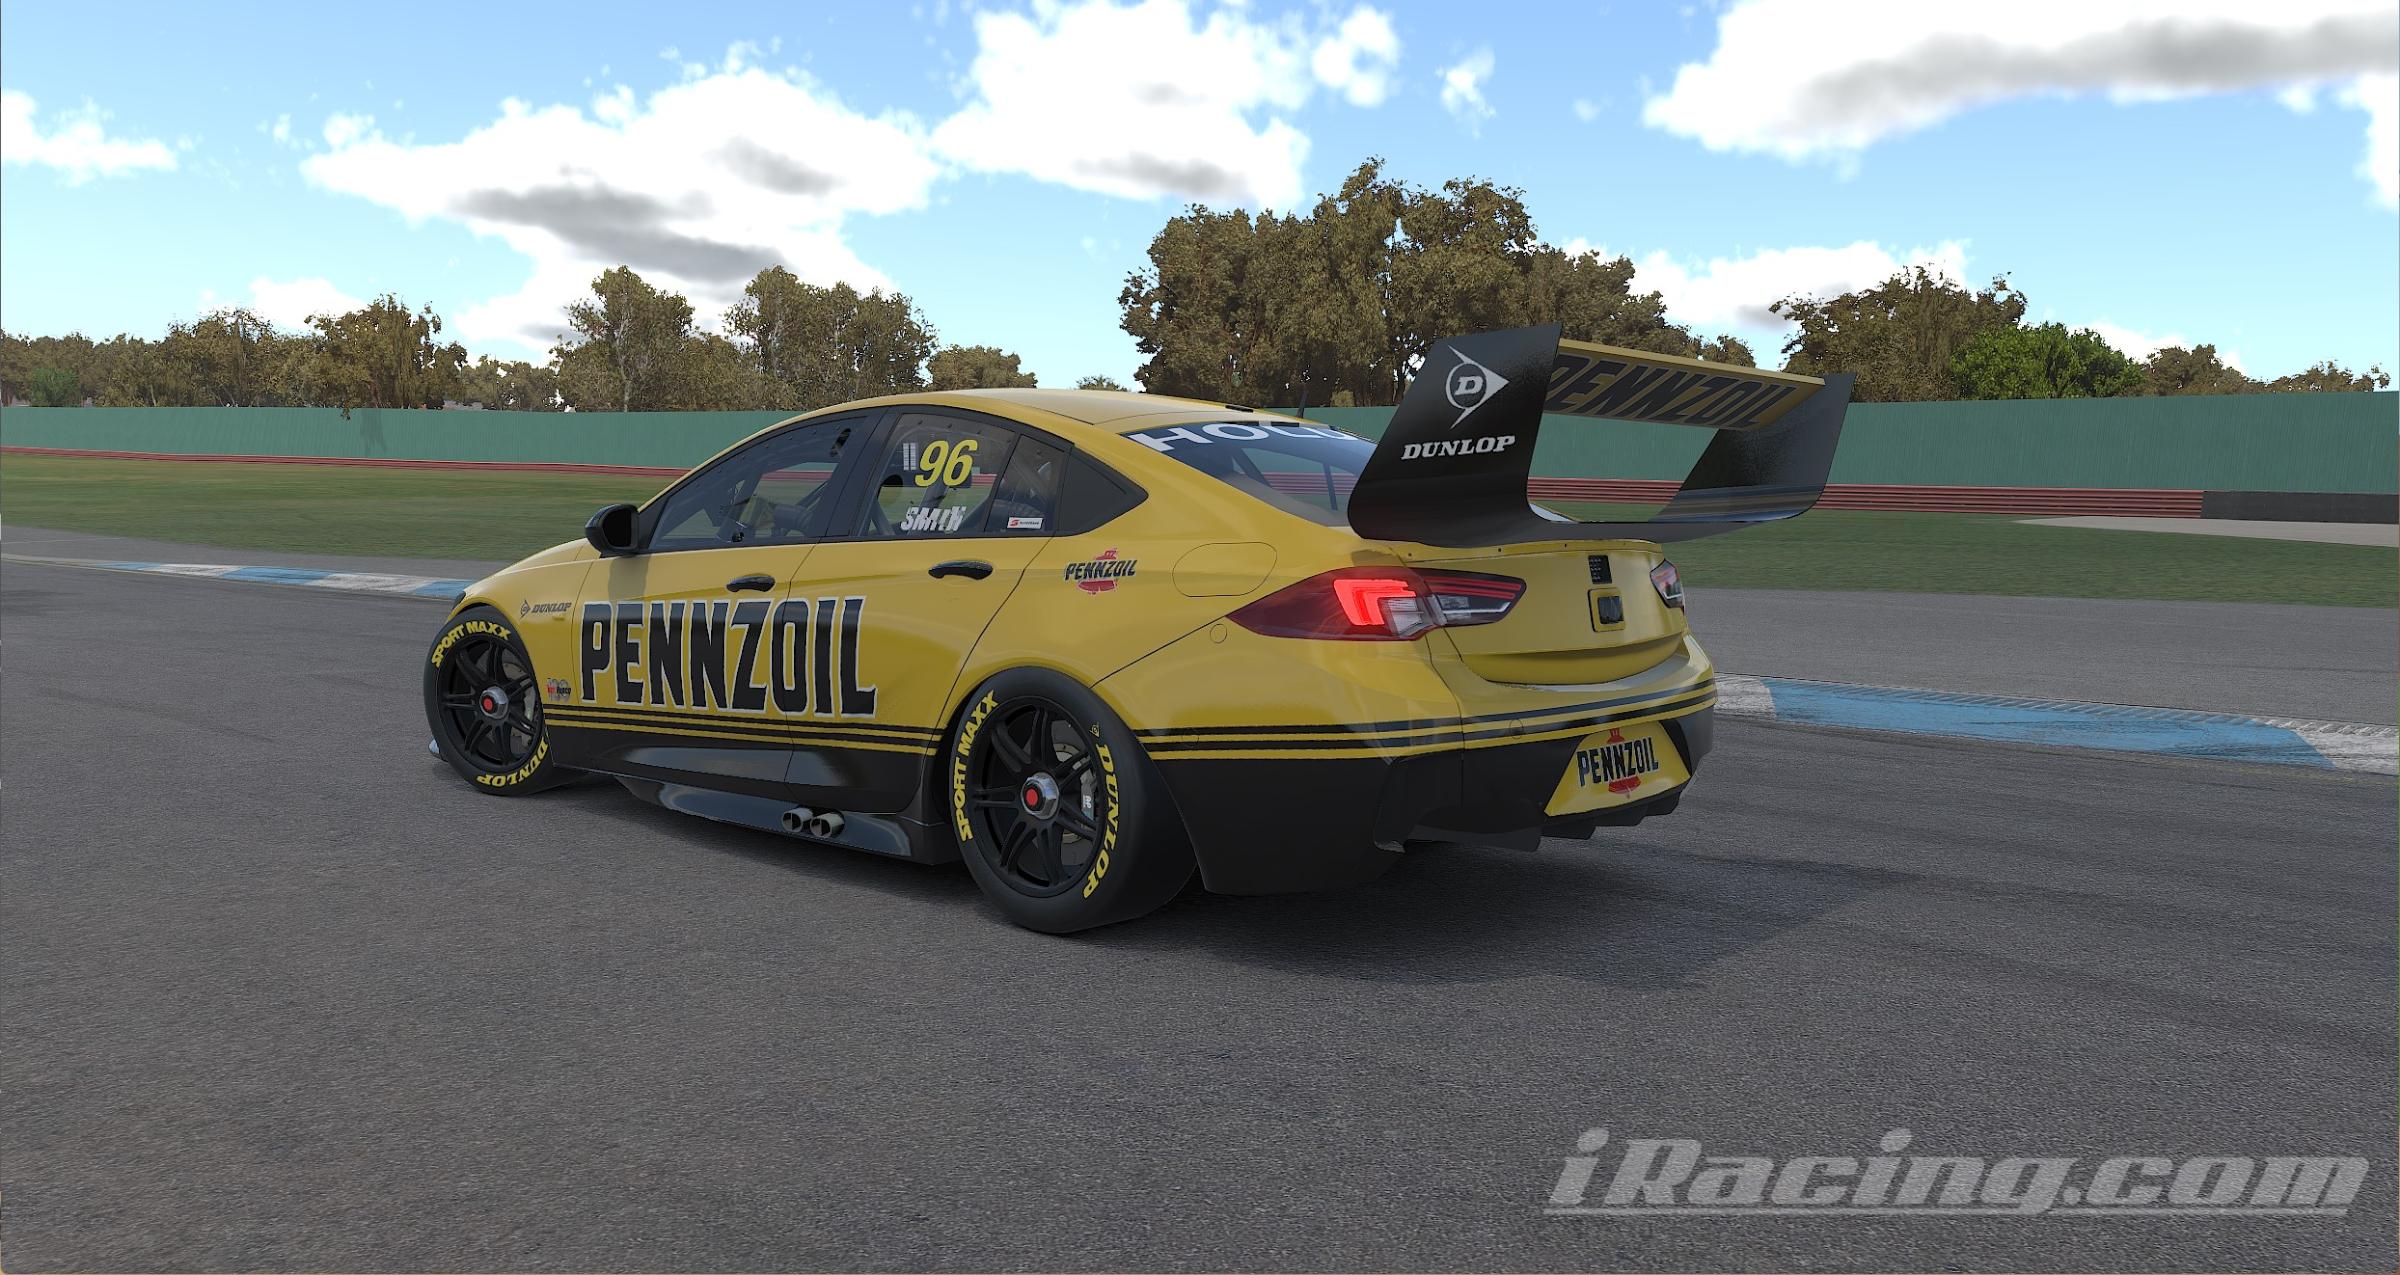 Preview of PENNZOIL by Christopher N S.